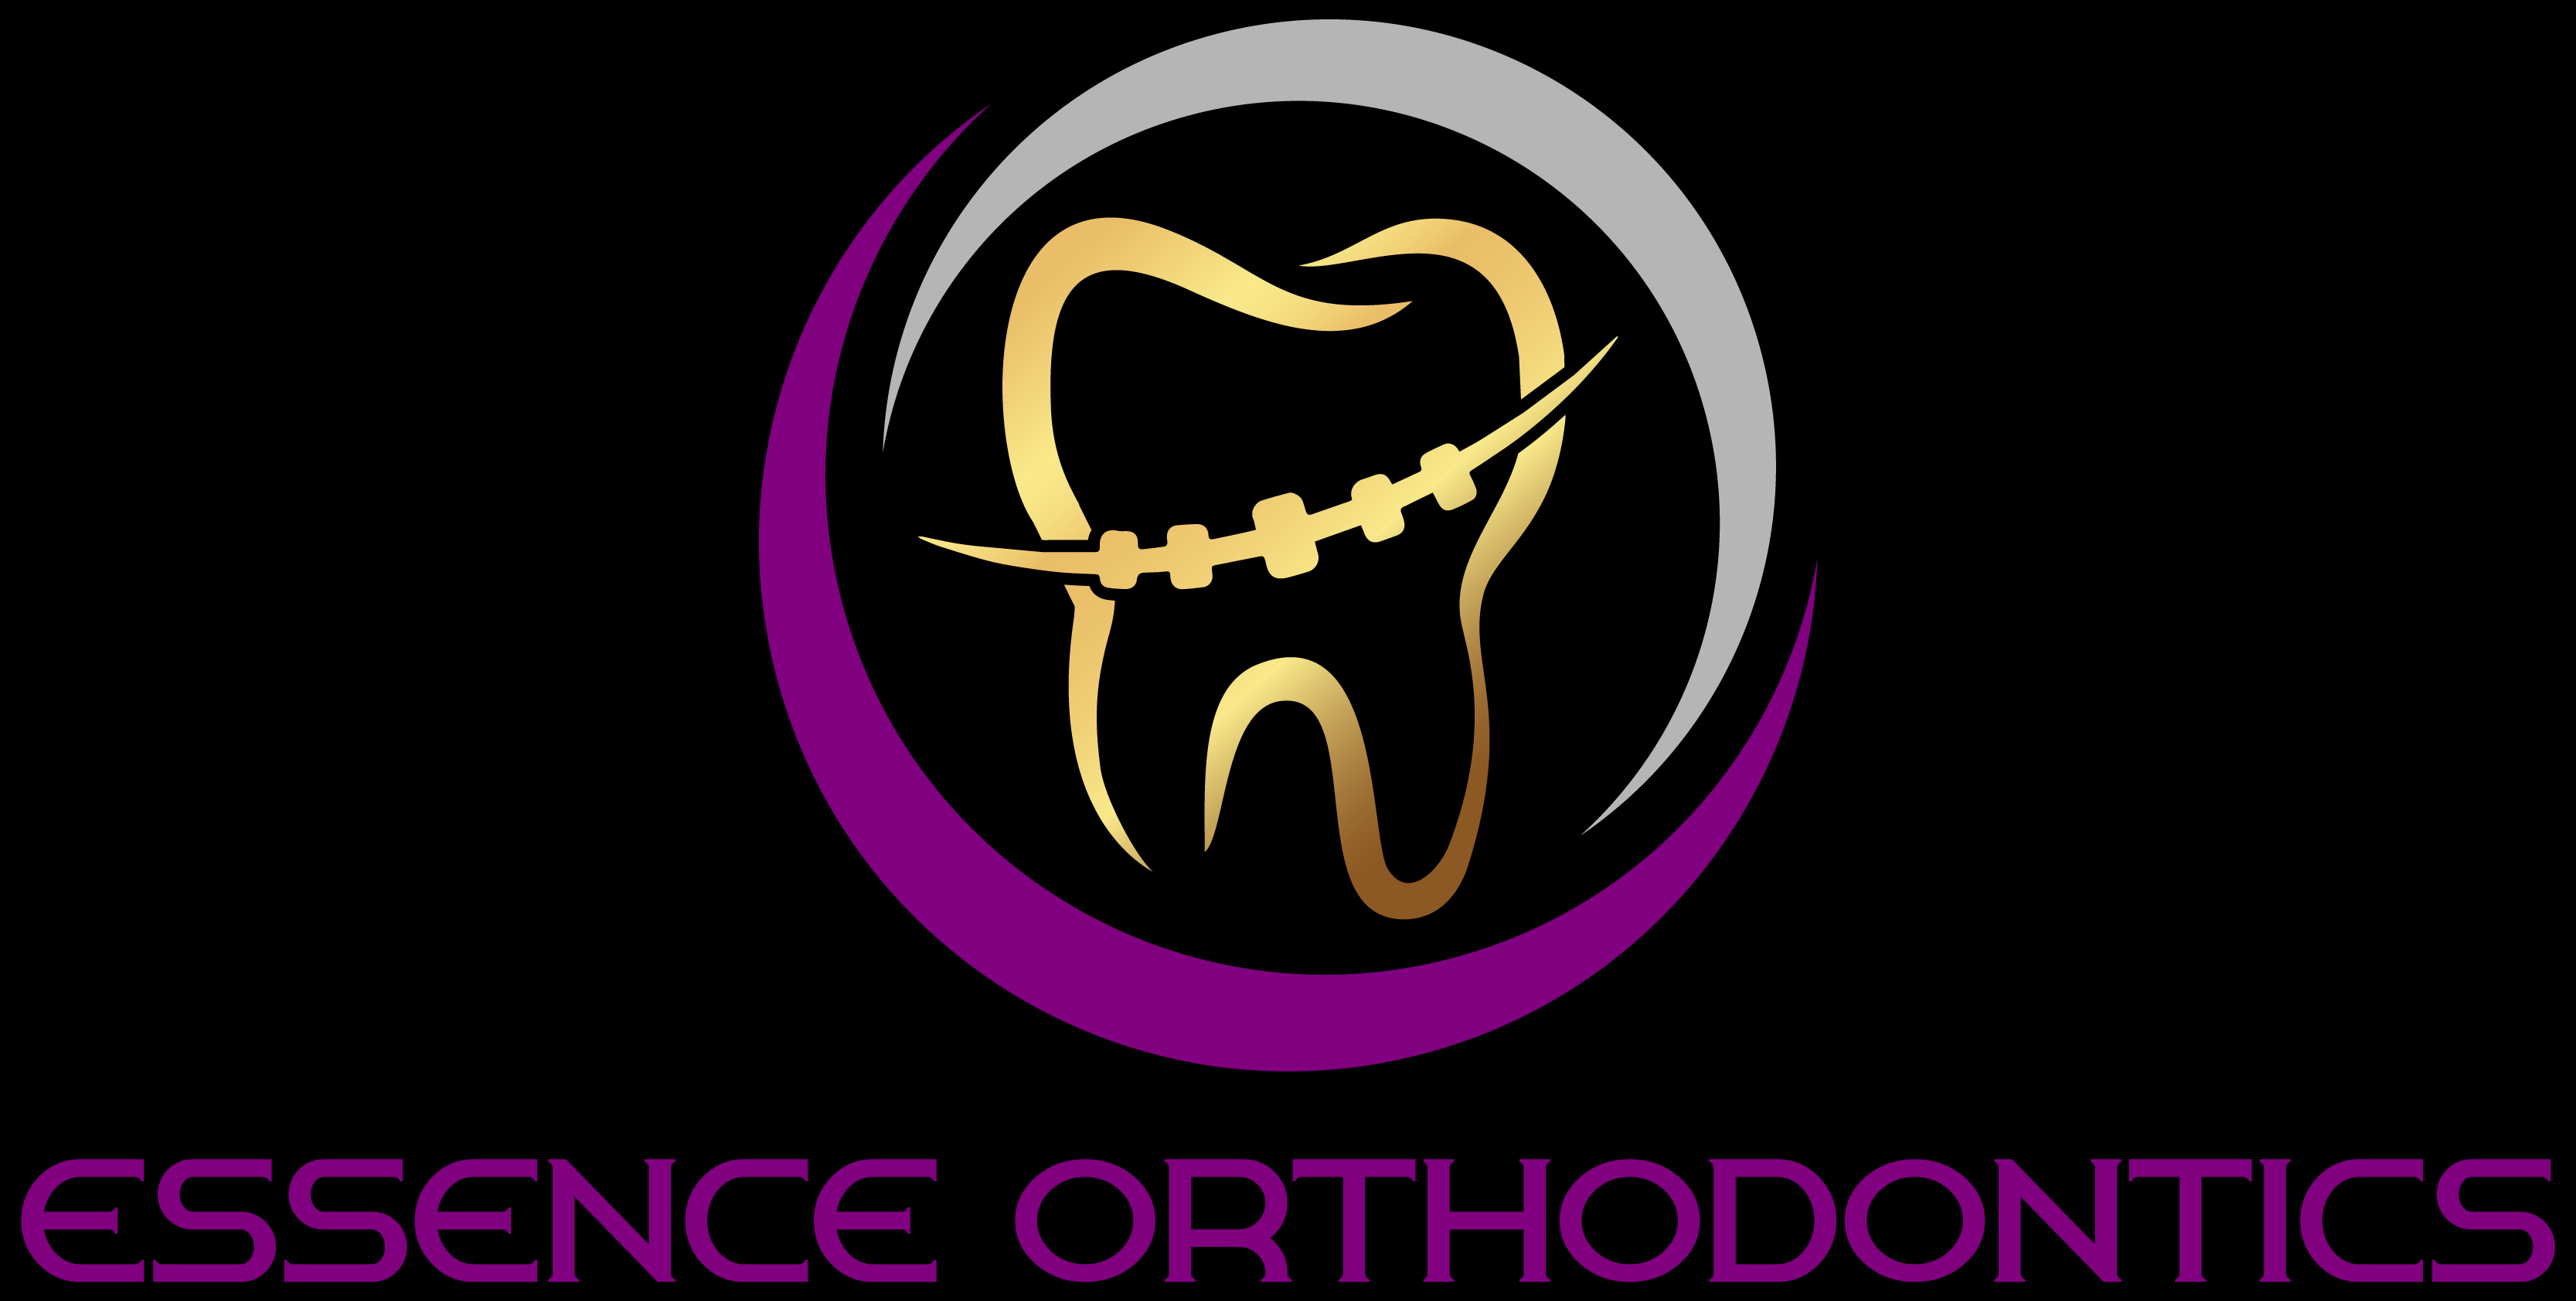 Tyrone,Ga - Great Tips on Braces & Invislaign for Kids, Teens & Adults